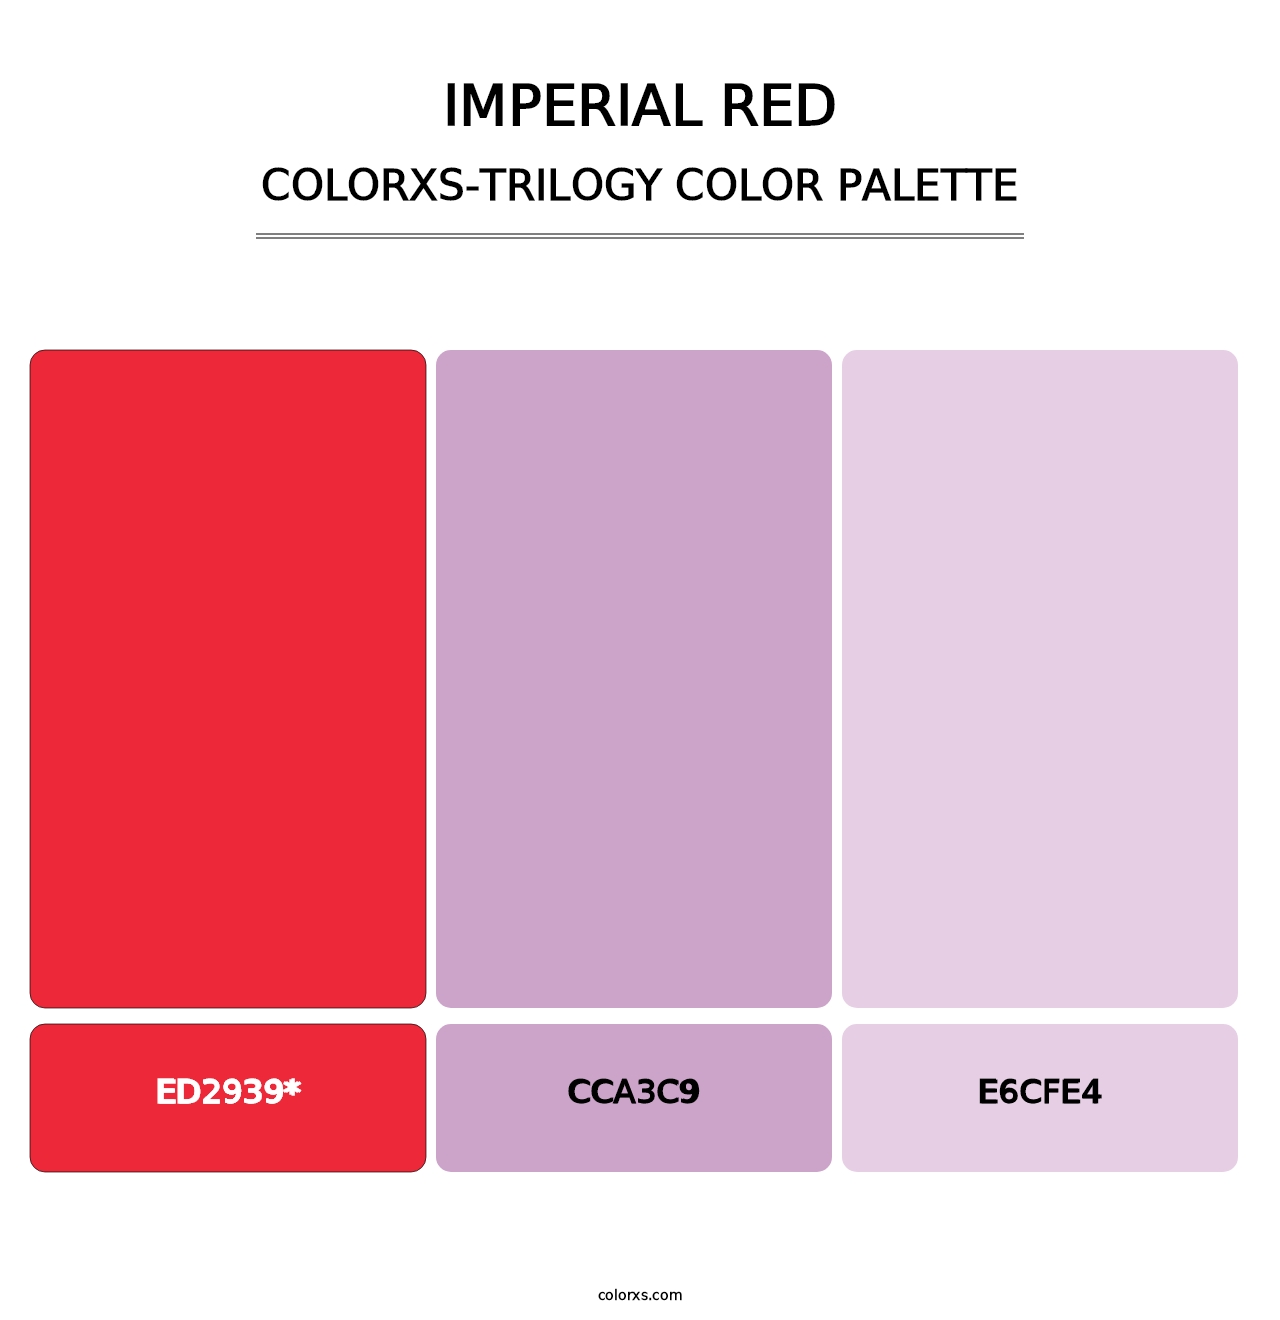 Imperial Red - Colorxs Trilogy Palette